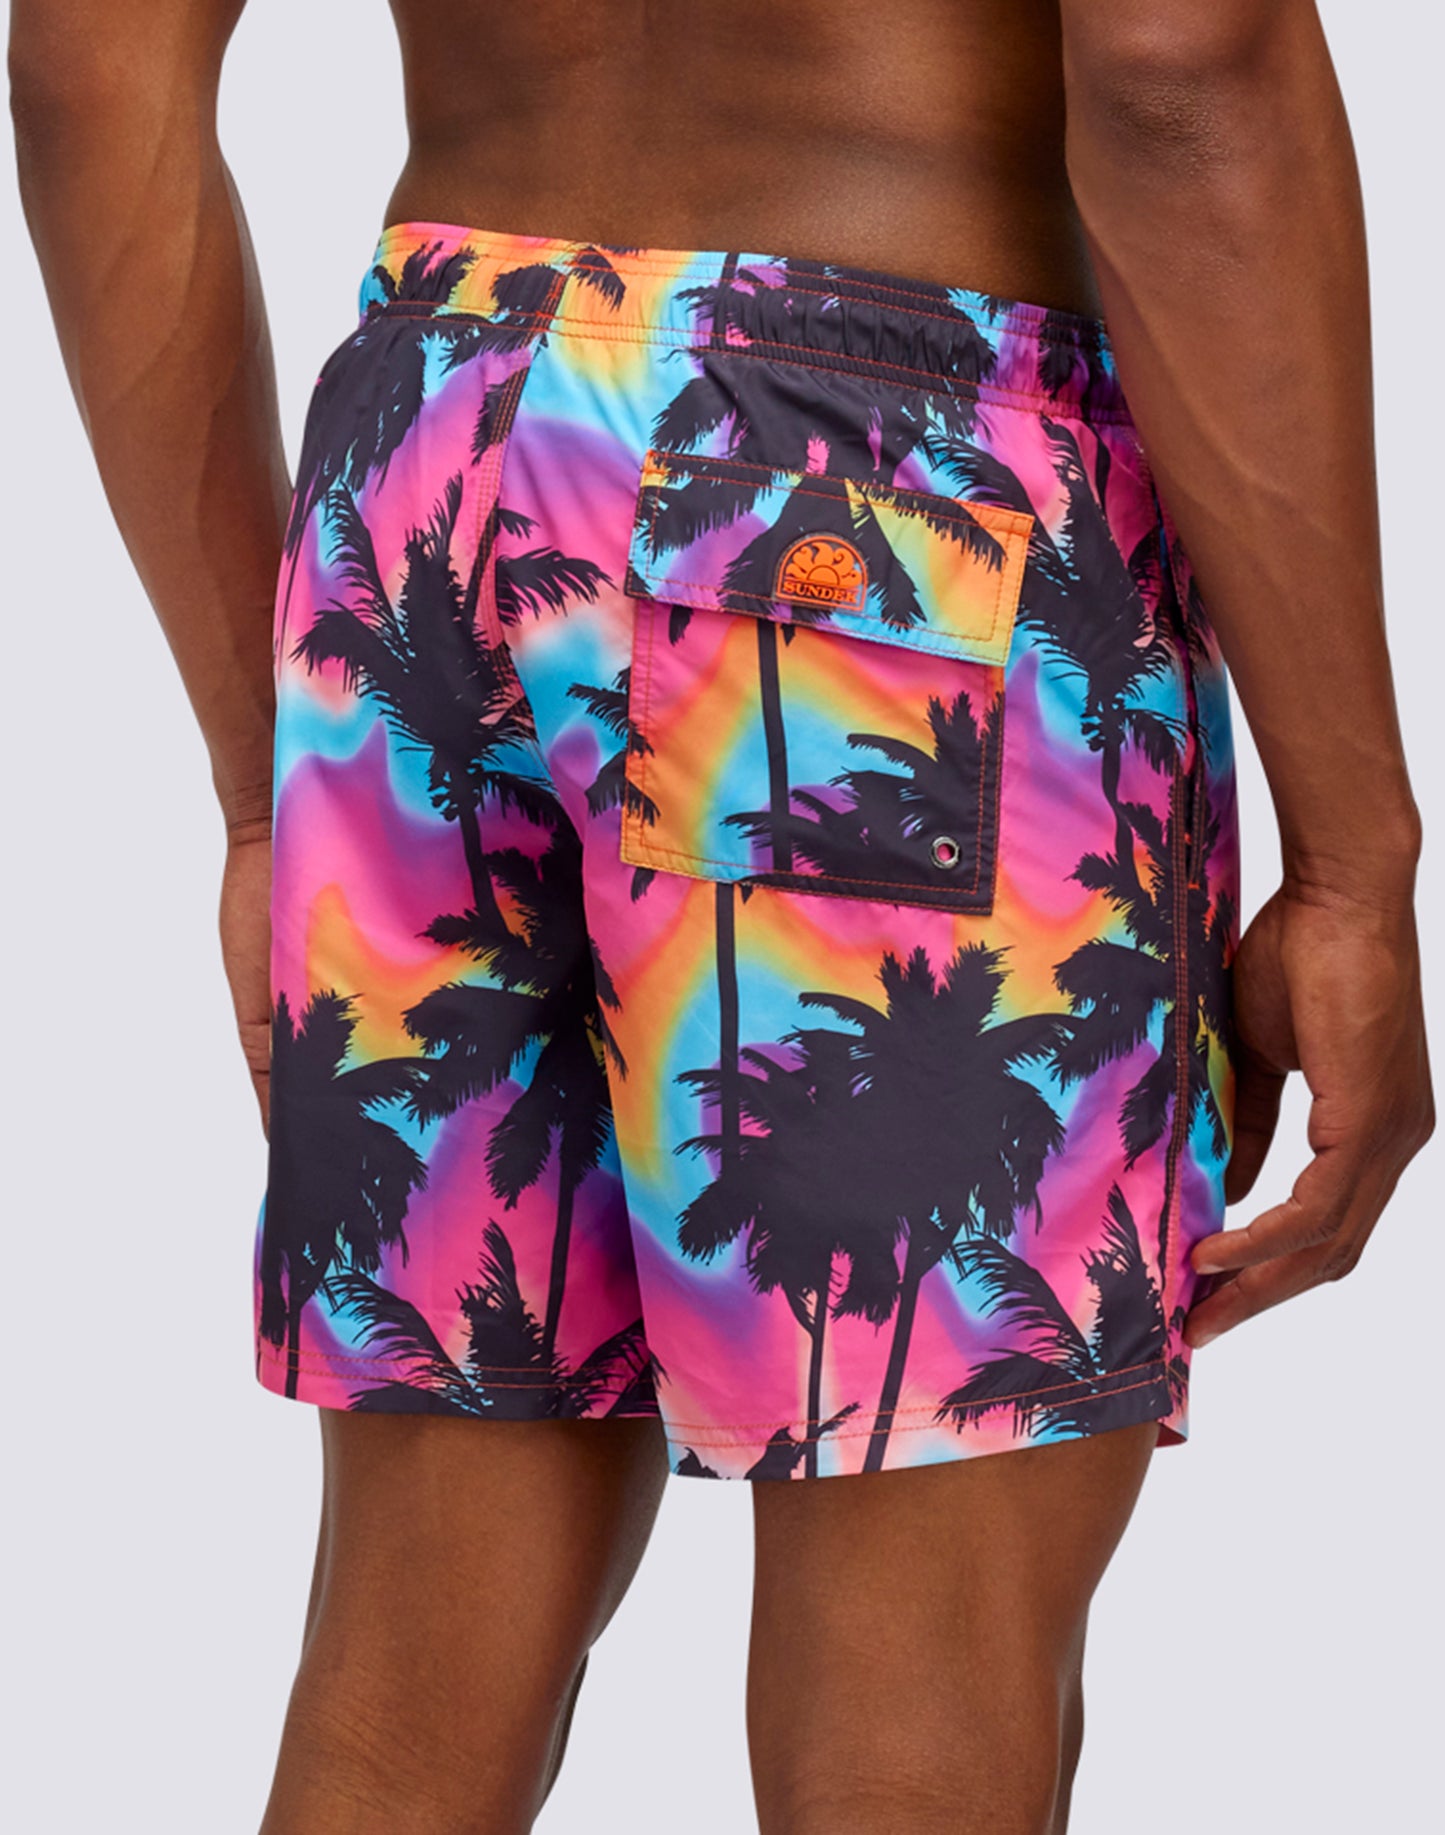 MEDIUM SWIMSHORTS ELASTIC WAIST PALM PRINT IN RECYCLED POLY